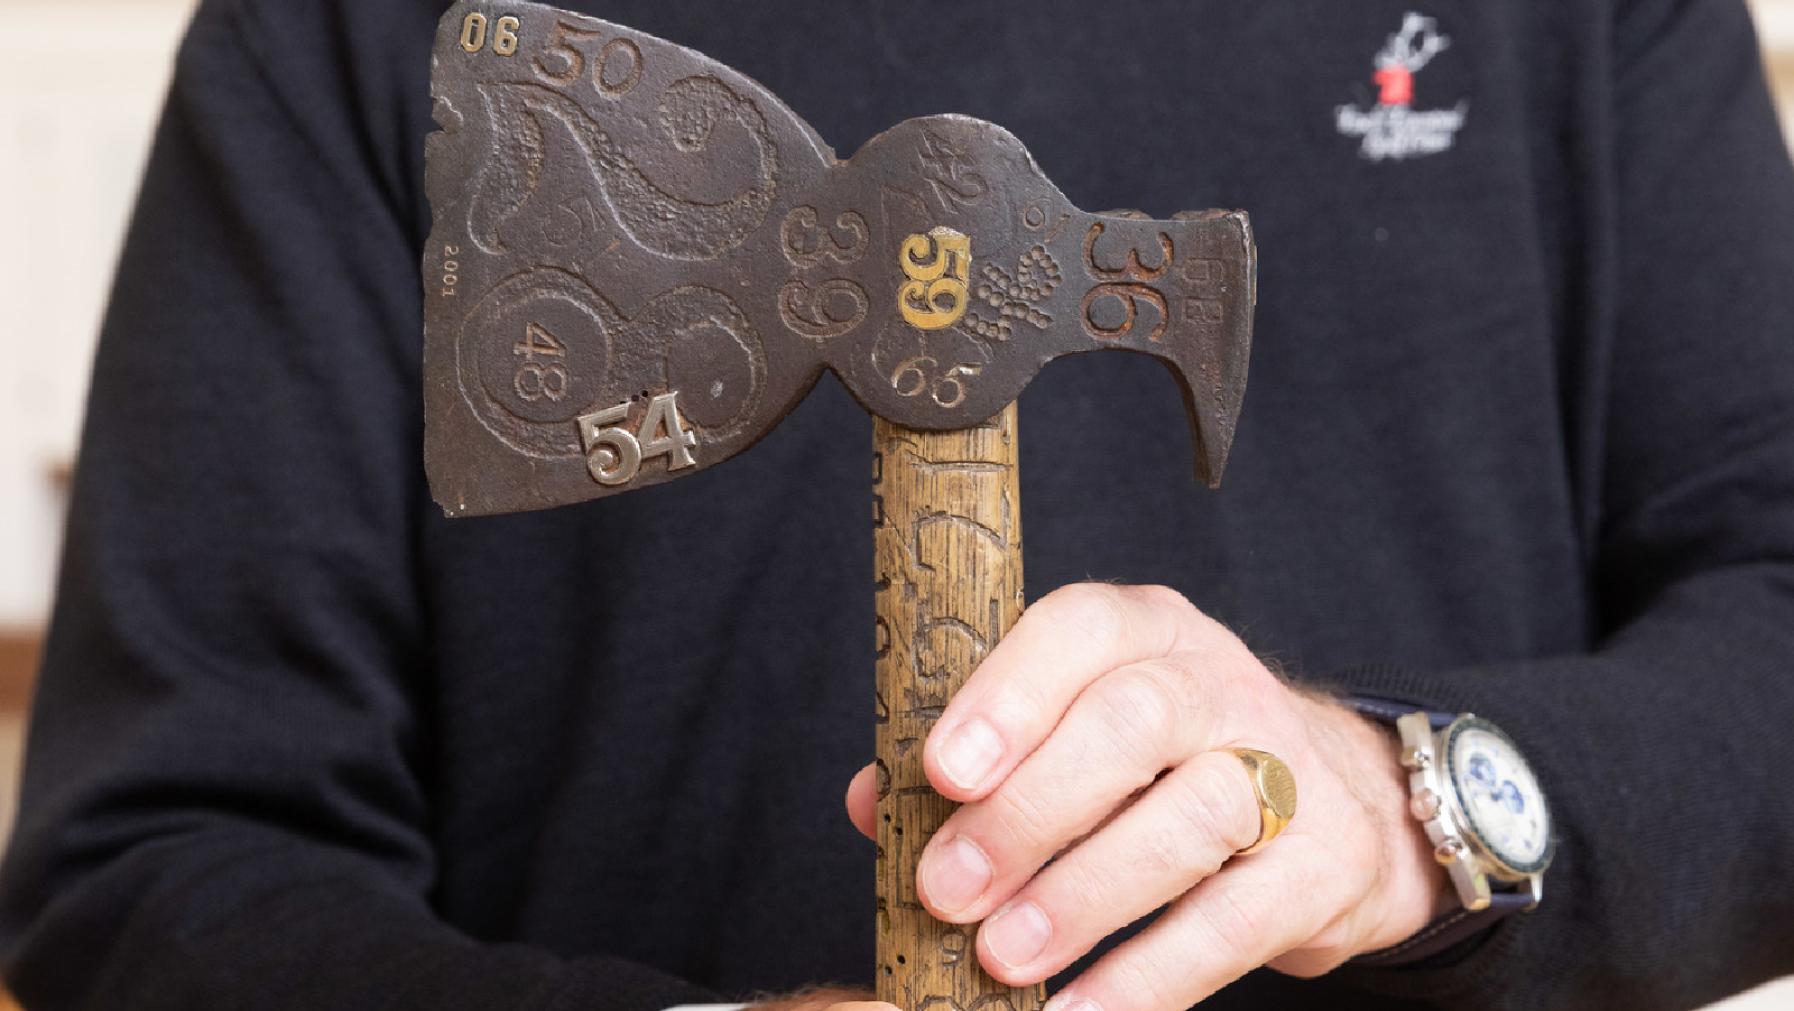 Close-up of the original hatchet with carvings and engravings of various class years from the early and mid-20th century.